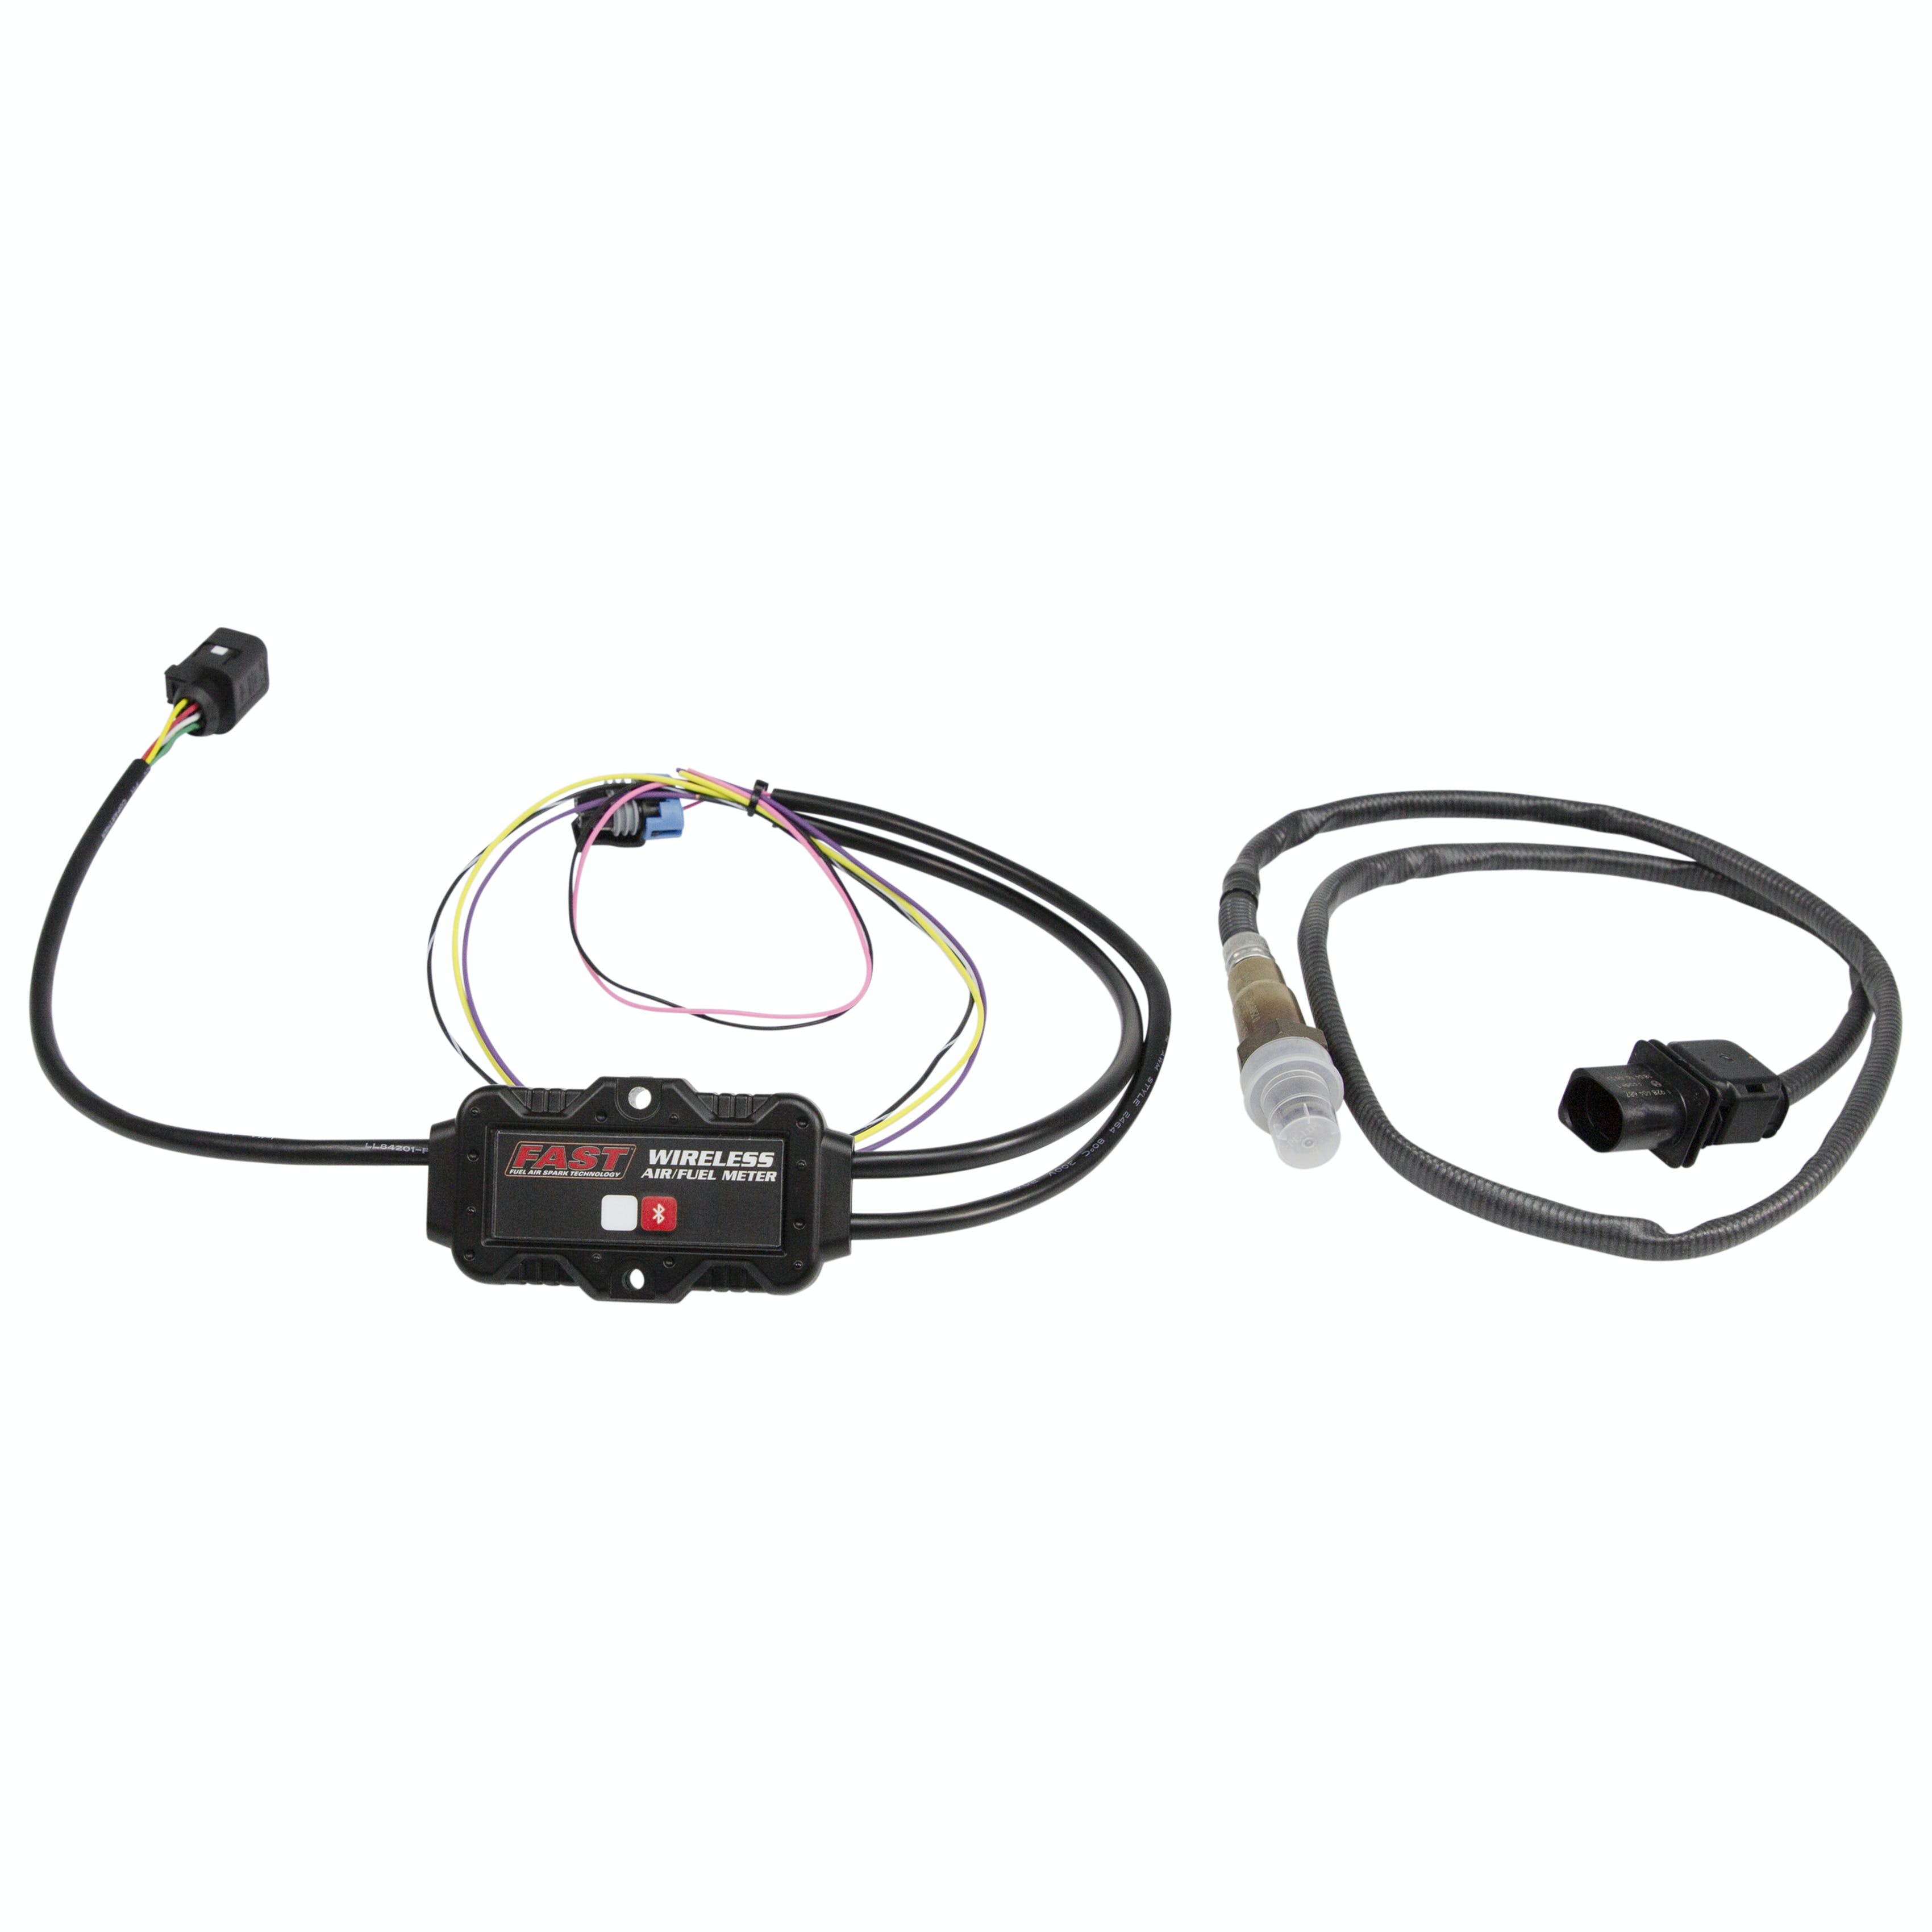 FAST - Fuel Air Spark Technology 170301 Wireless Air/Fuel Meter - Single Bank